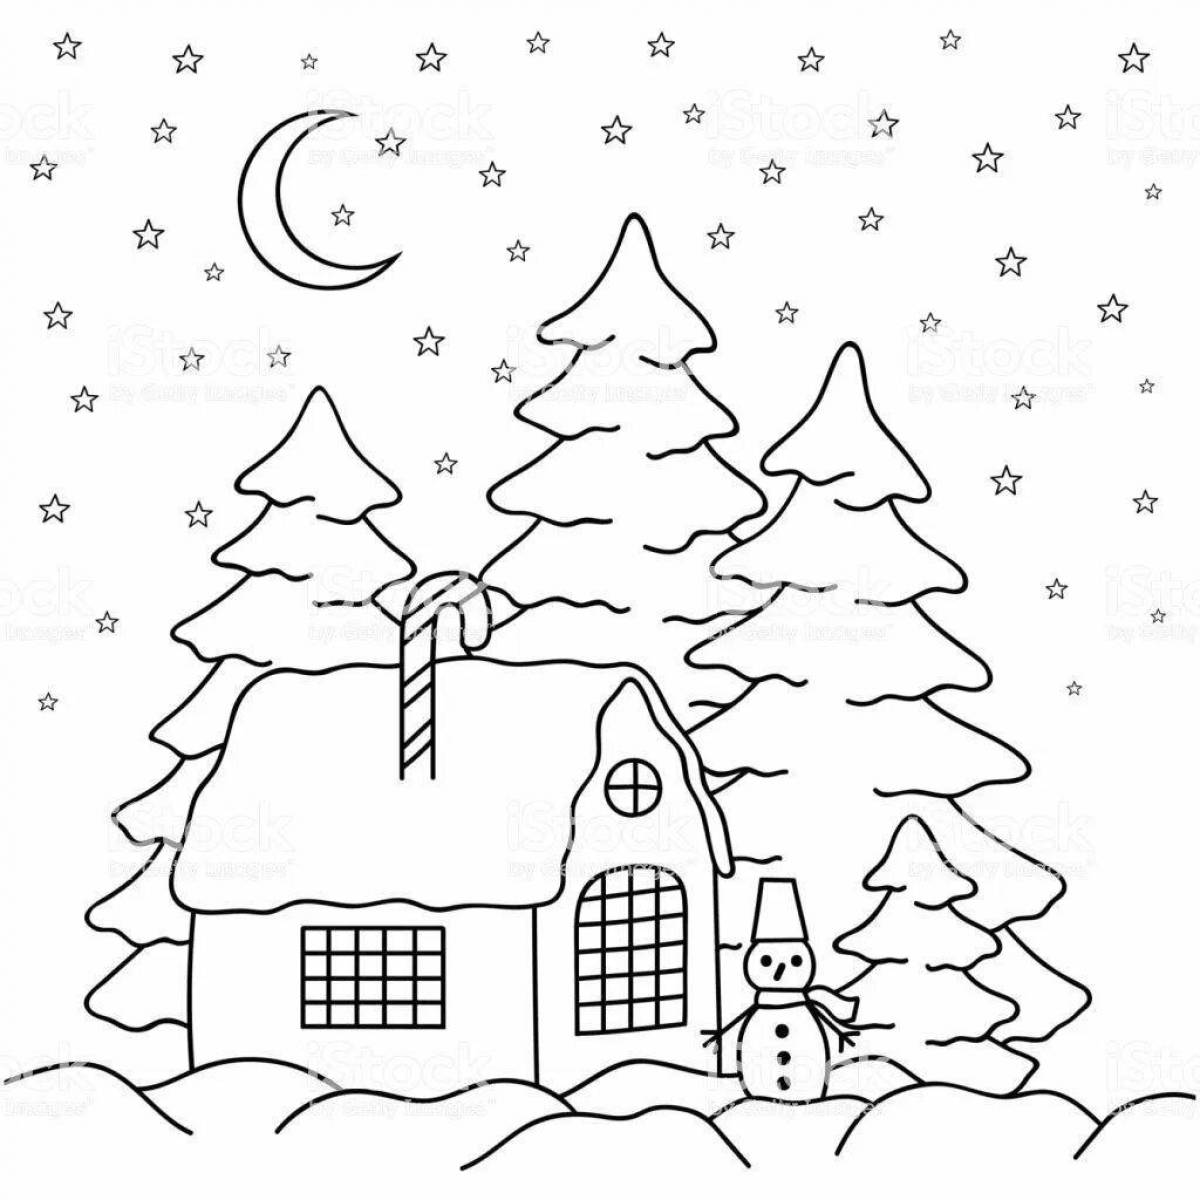 Amazing winter forest landscape coloring book